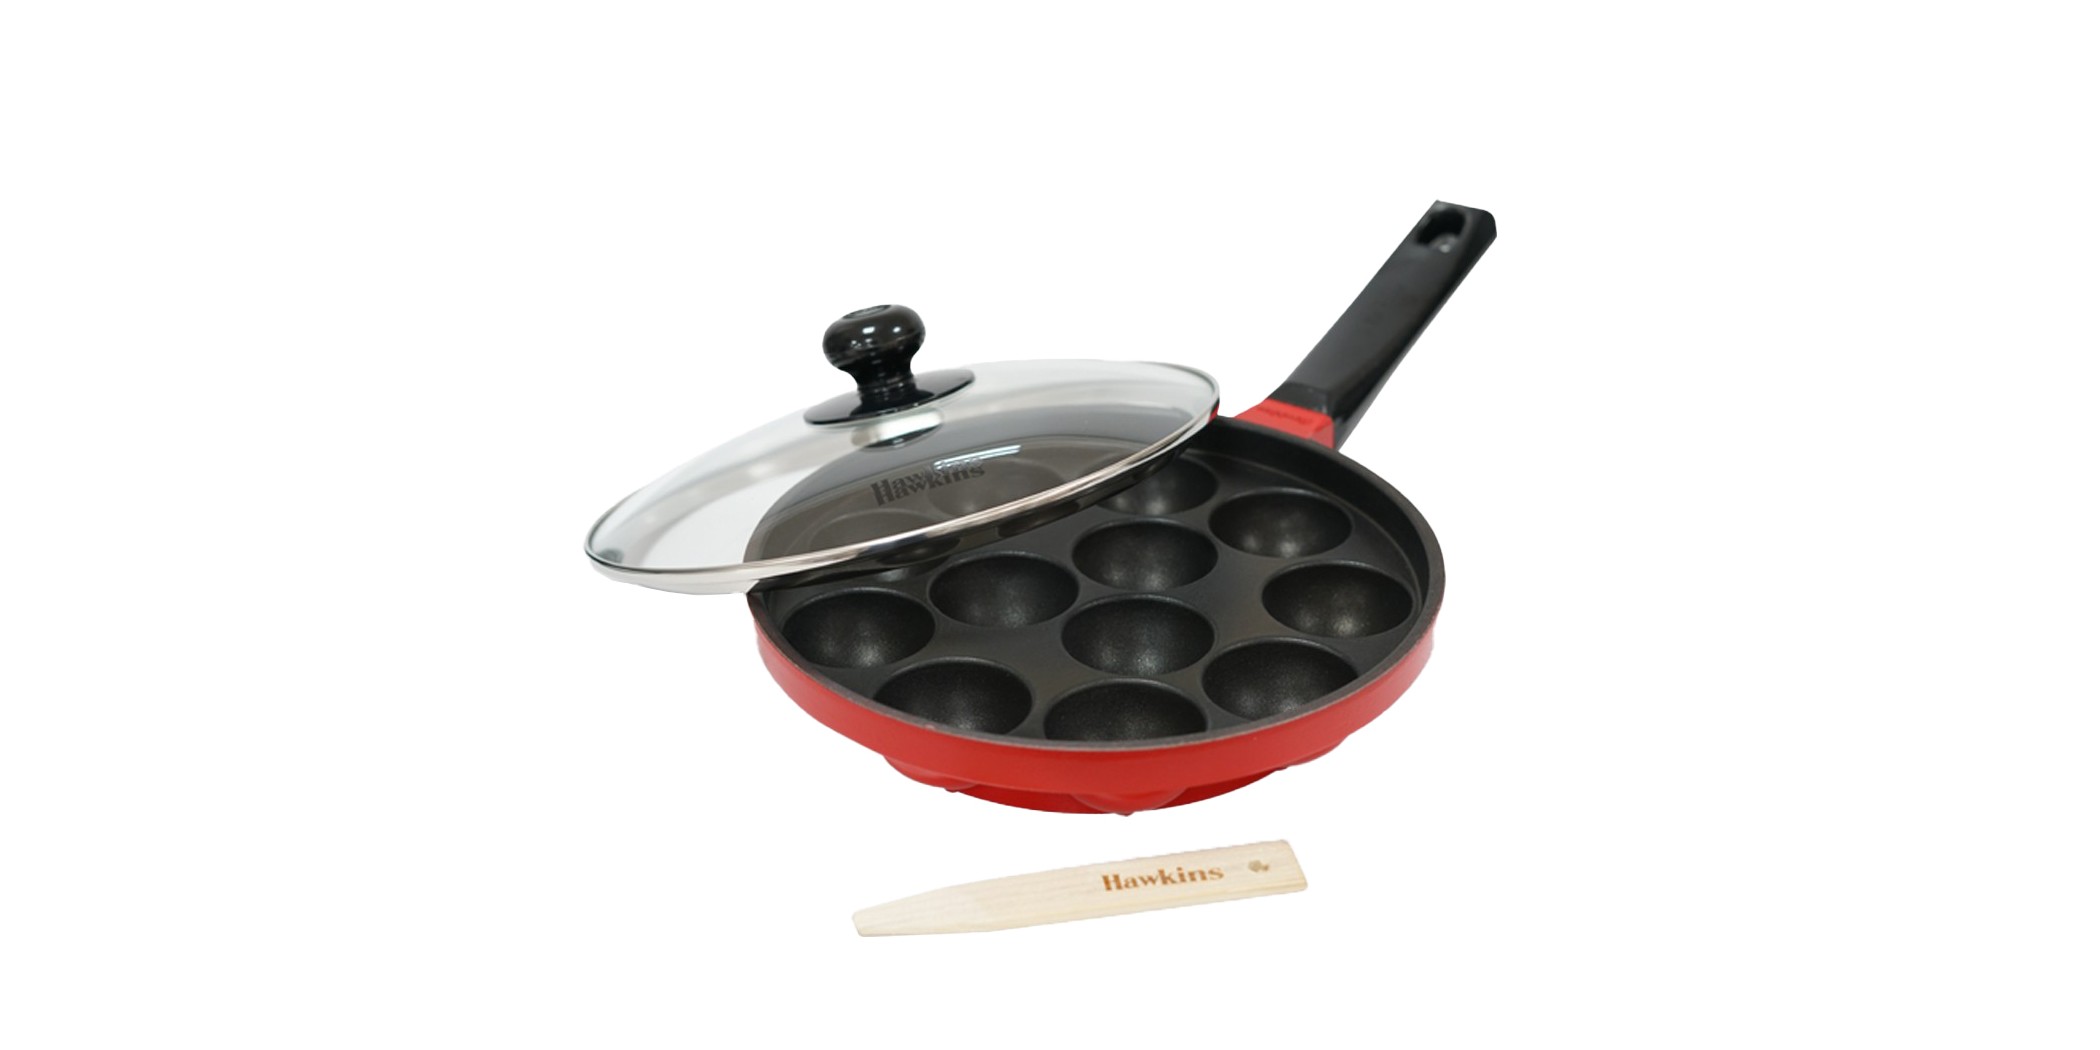 Hawkins Nonstick Appe Pan with Glass Lid, 12 Cups, 22 cm 